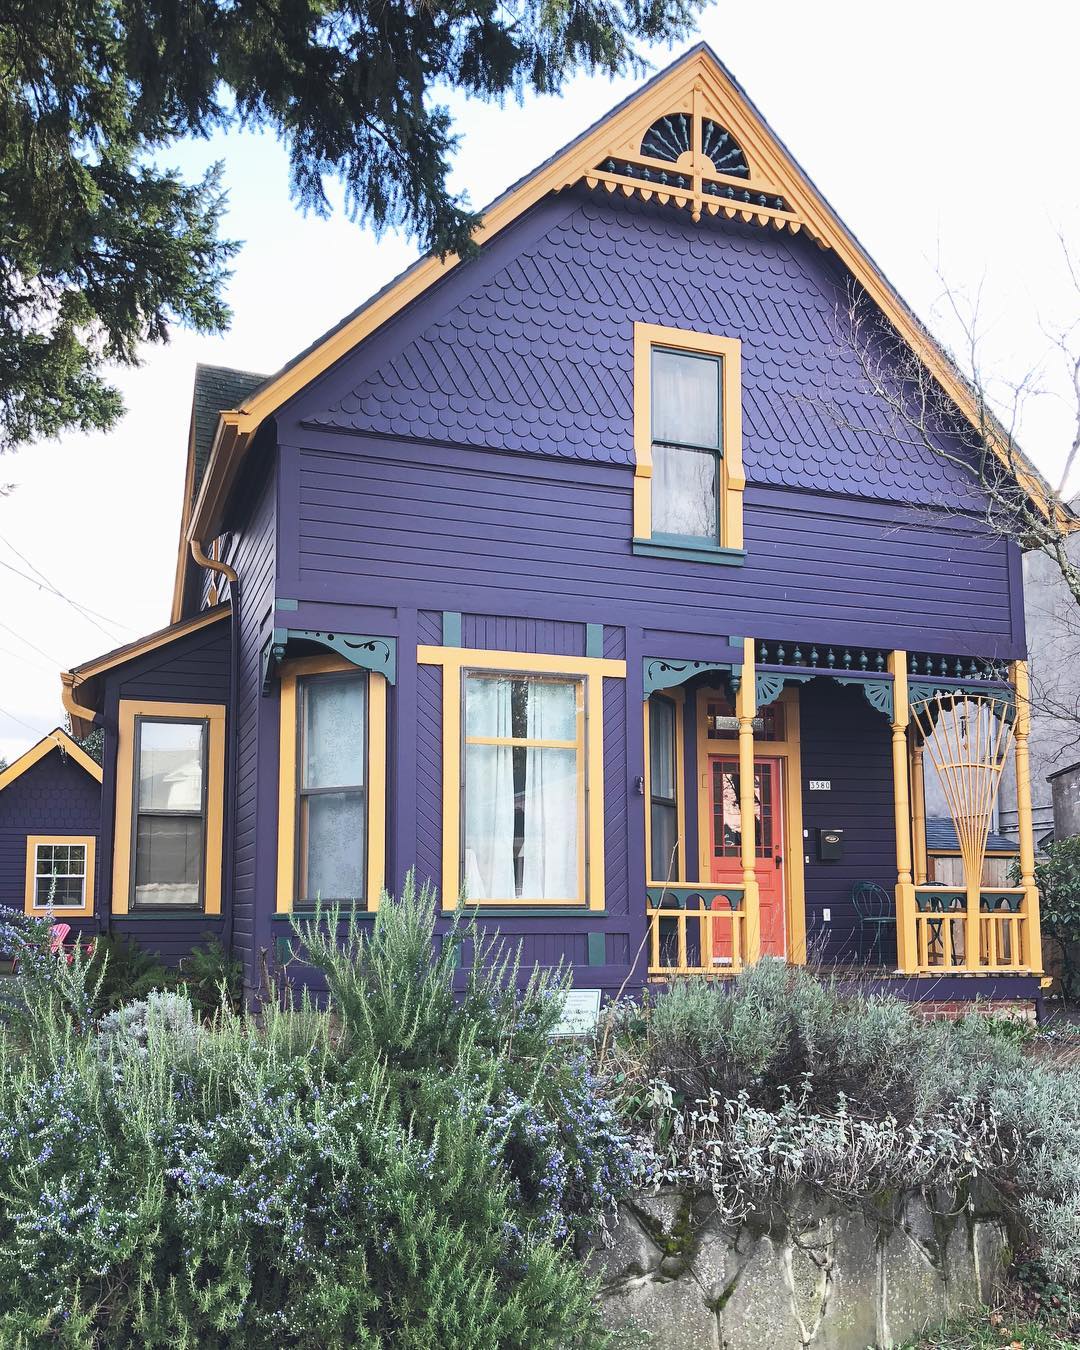 Front of single-family home painted purple with yellow trim Photo by Instagram user @housesofportland